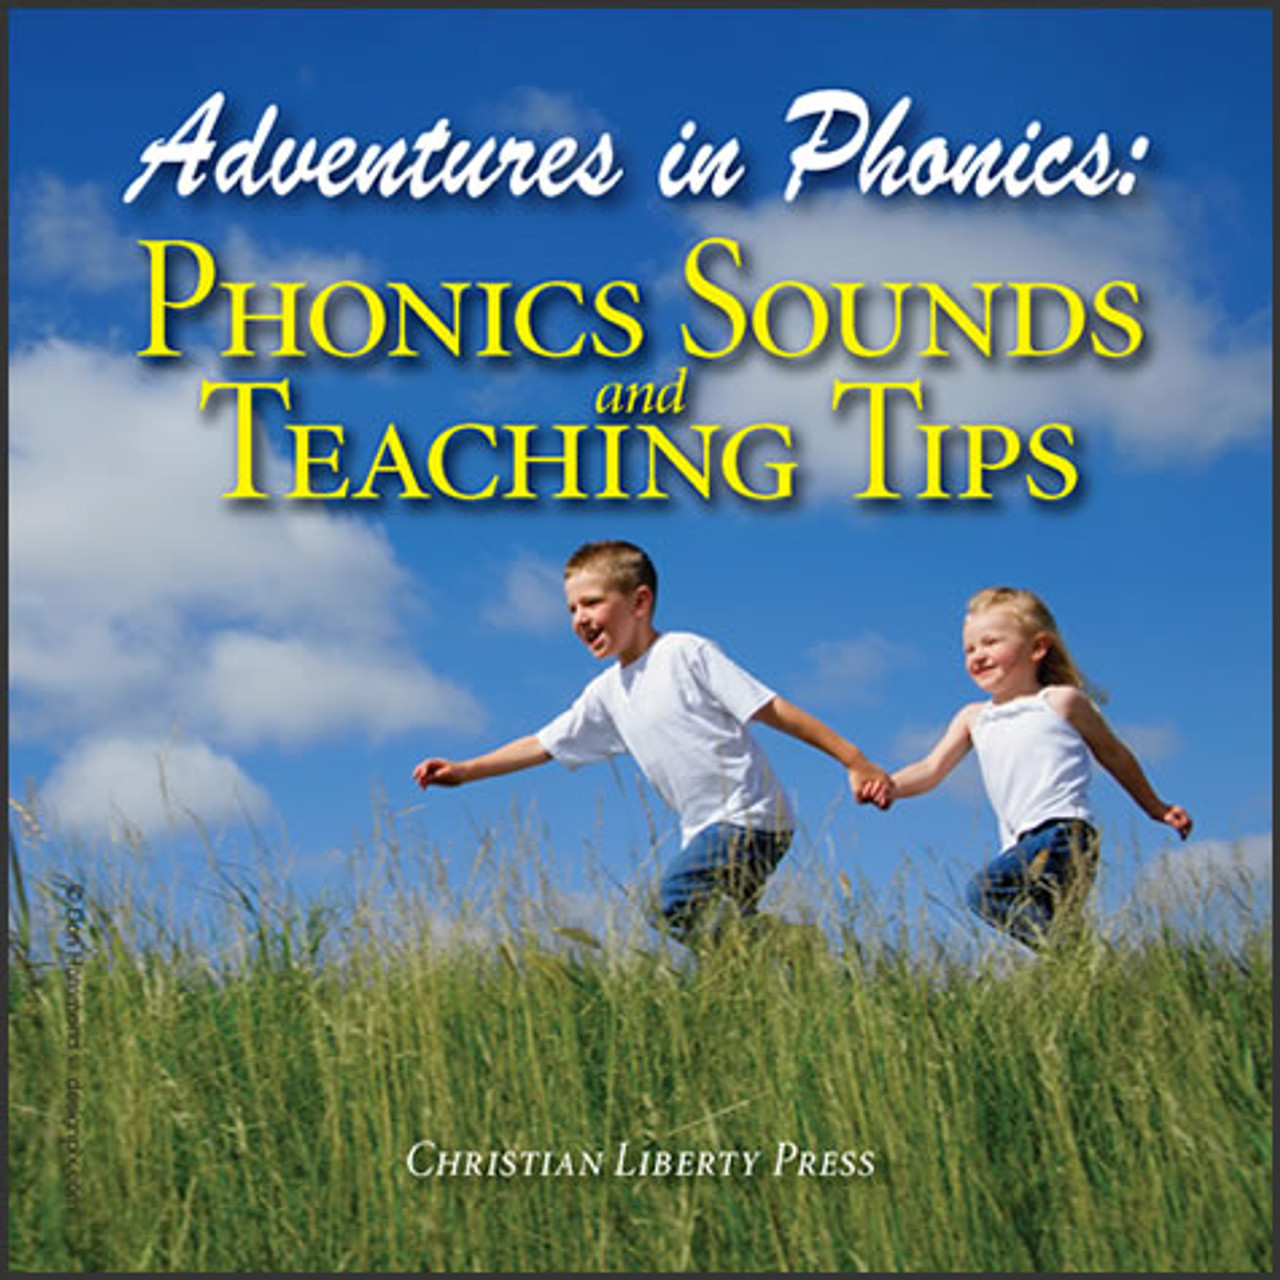 Adventures in Phonics: Phonics Sounds and Teaching Tips Audio CD